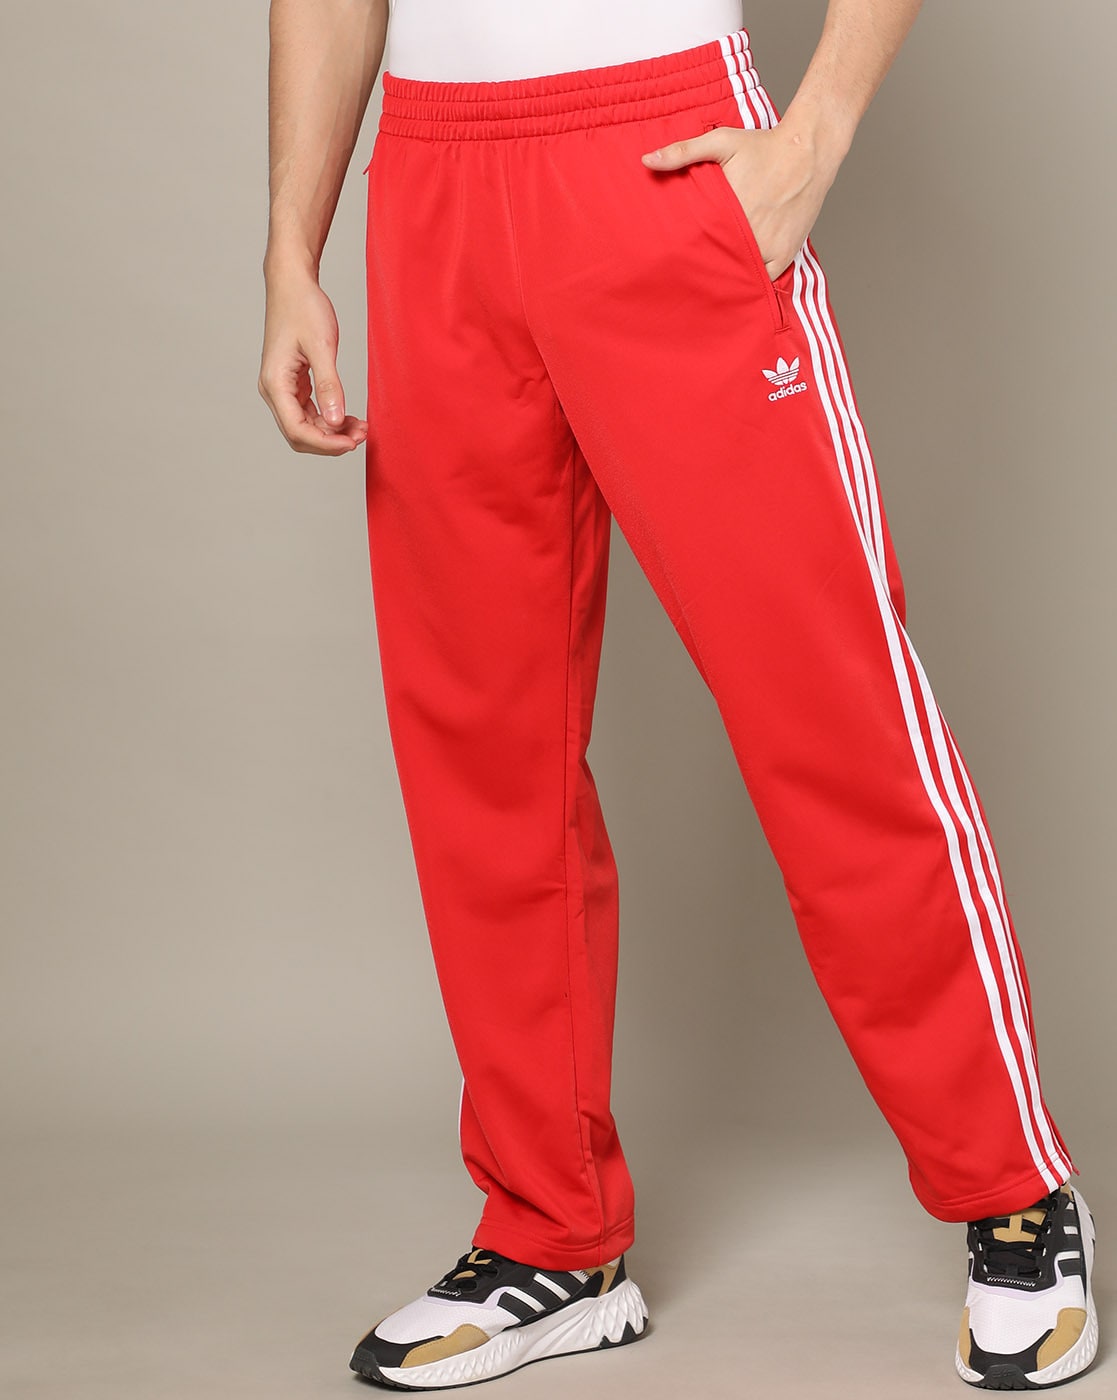 Firebird Track Pants Black | Open hems with ankle zips $70 | Adidas track  pants outfit, Adidas pants, Track pants outfit